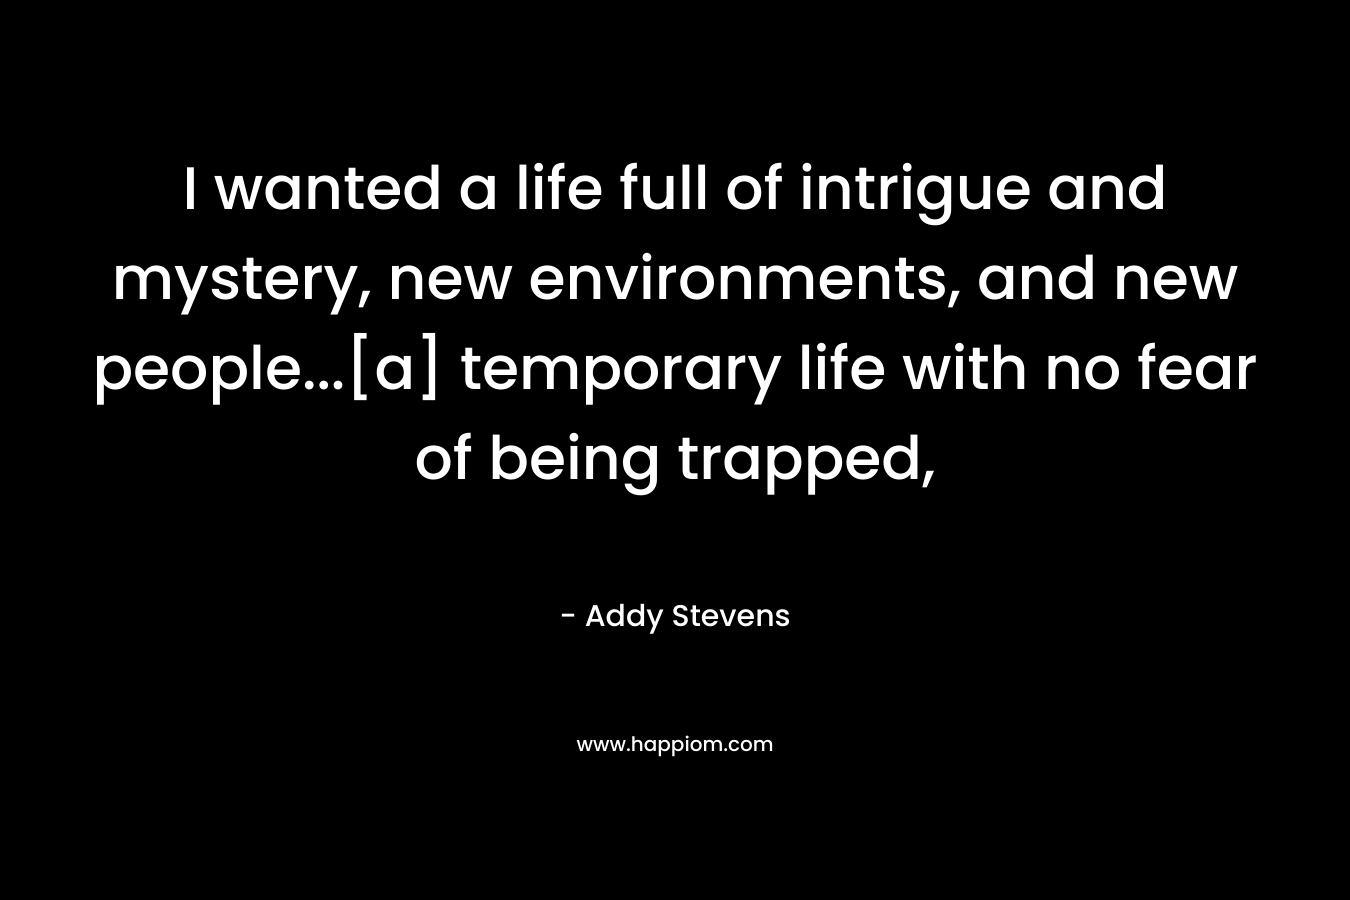 I wanted a life full of intrigue and mystery, new environments, and new people…[a] temporary life with no fear of being trapped, – Addy Stevens